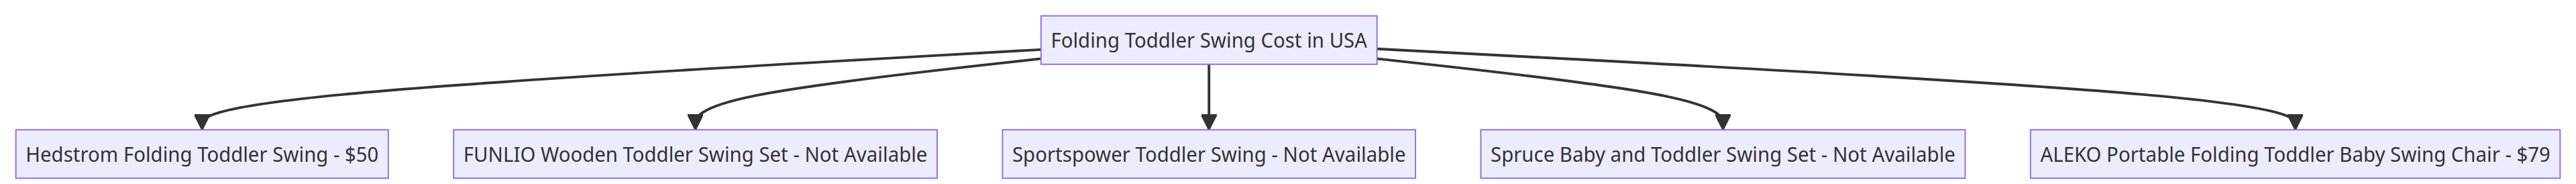 What is the Folding Toddler Swing Price?